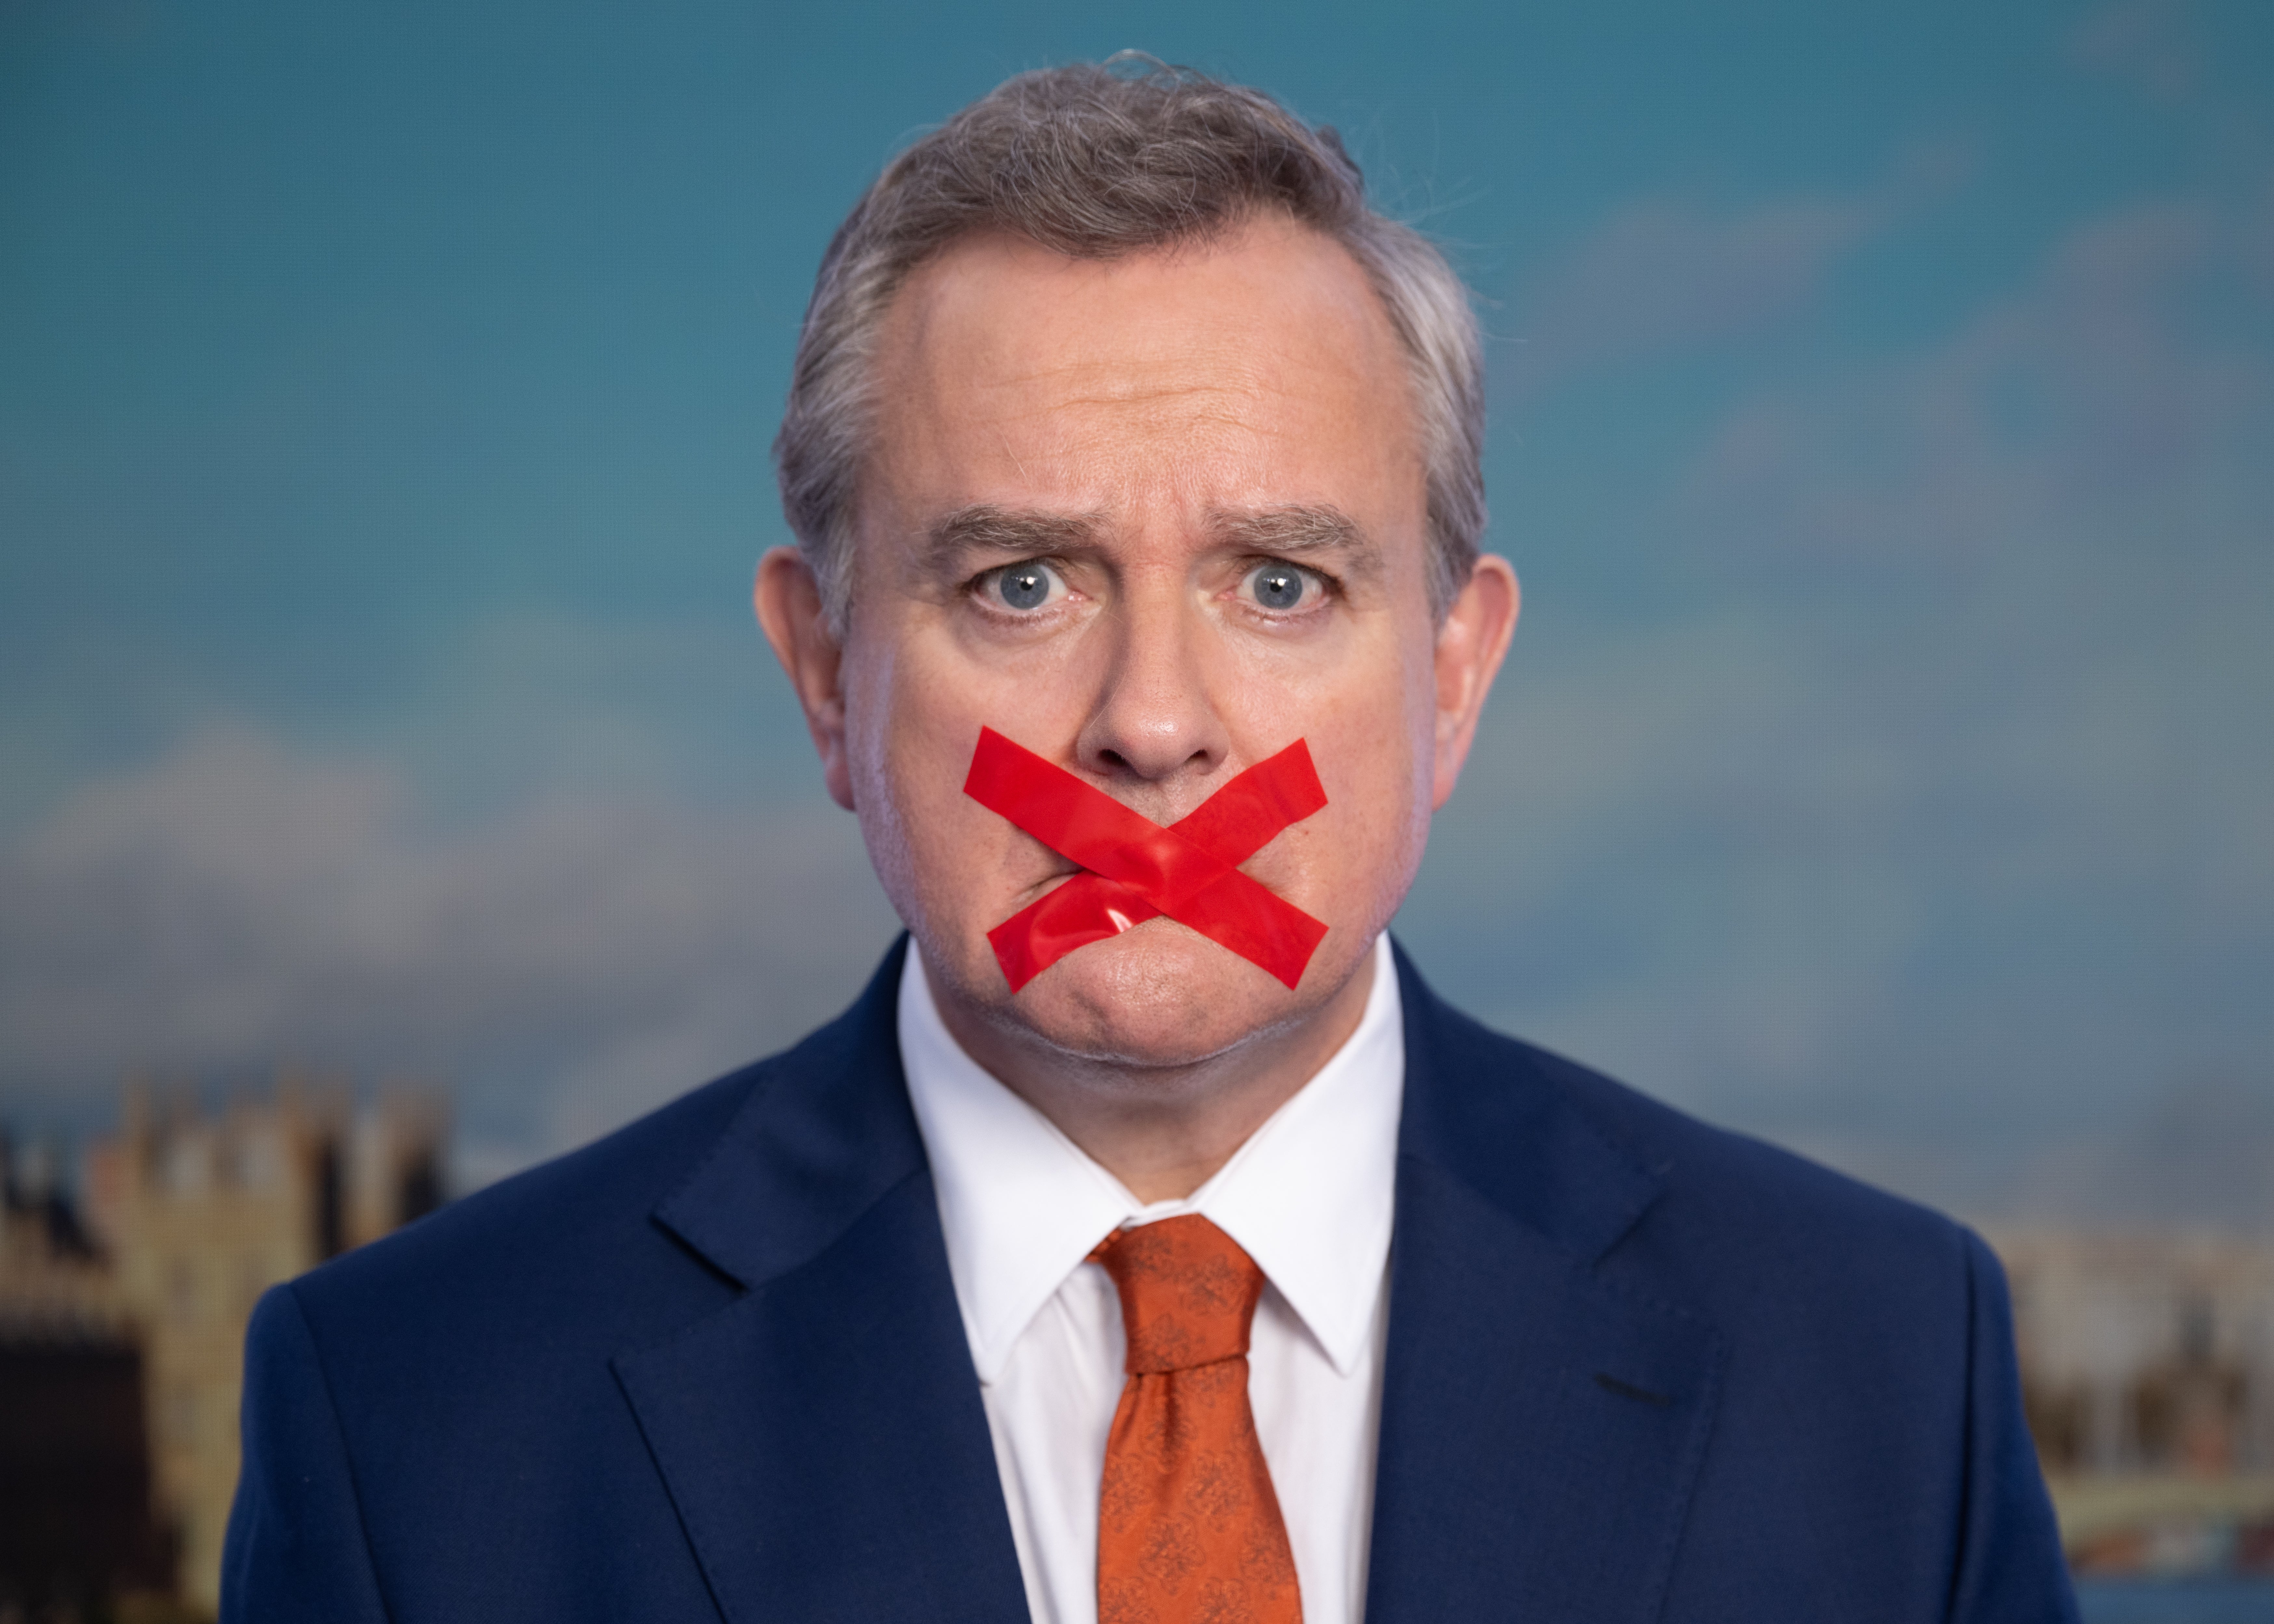 hugh bonneville, douglas is cancelled review: cancel culture drama offers only sermons, moral binaries and easy answers